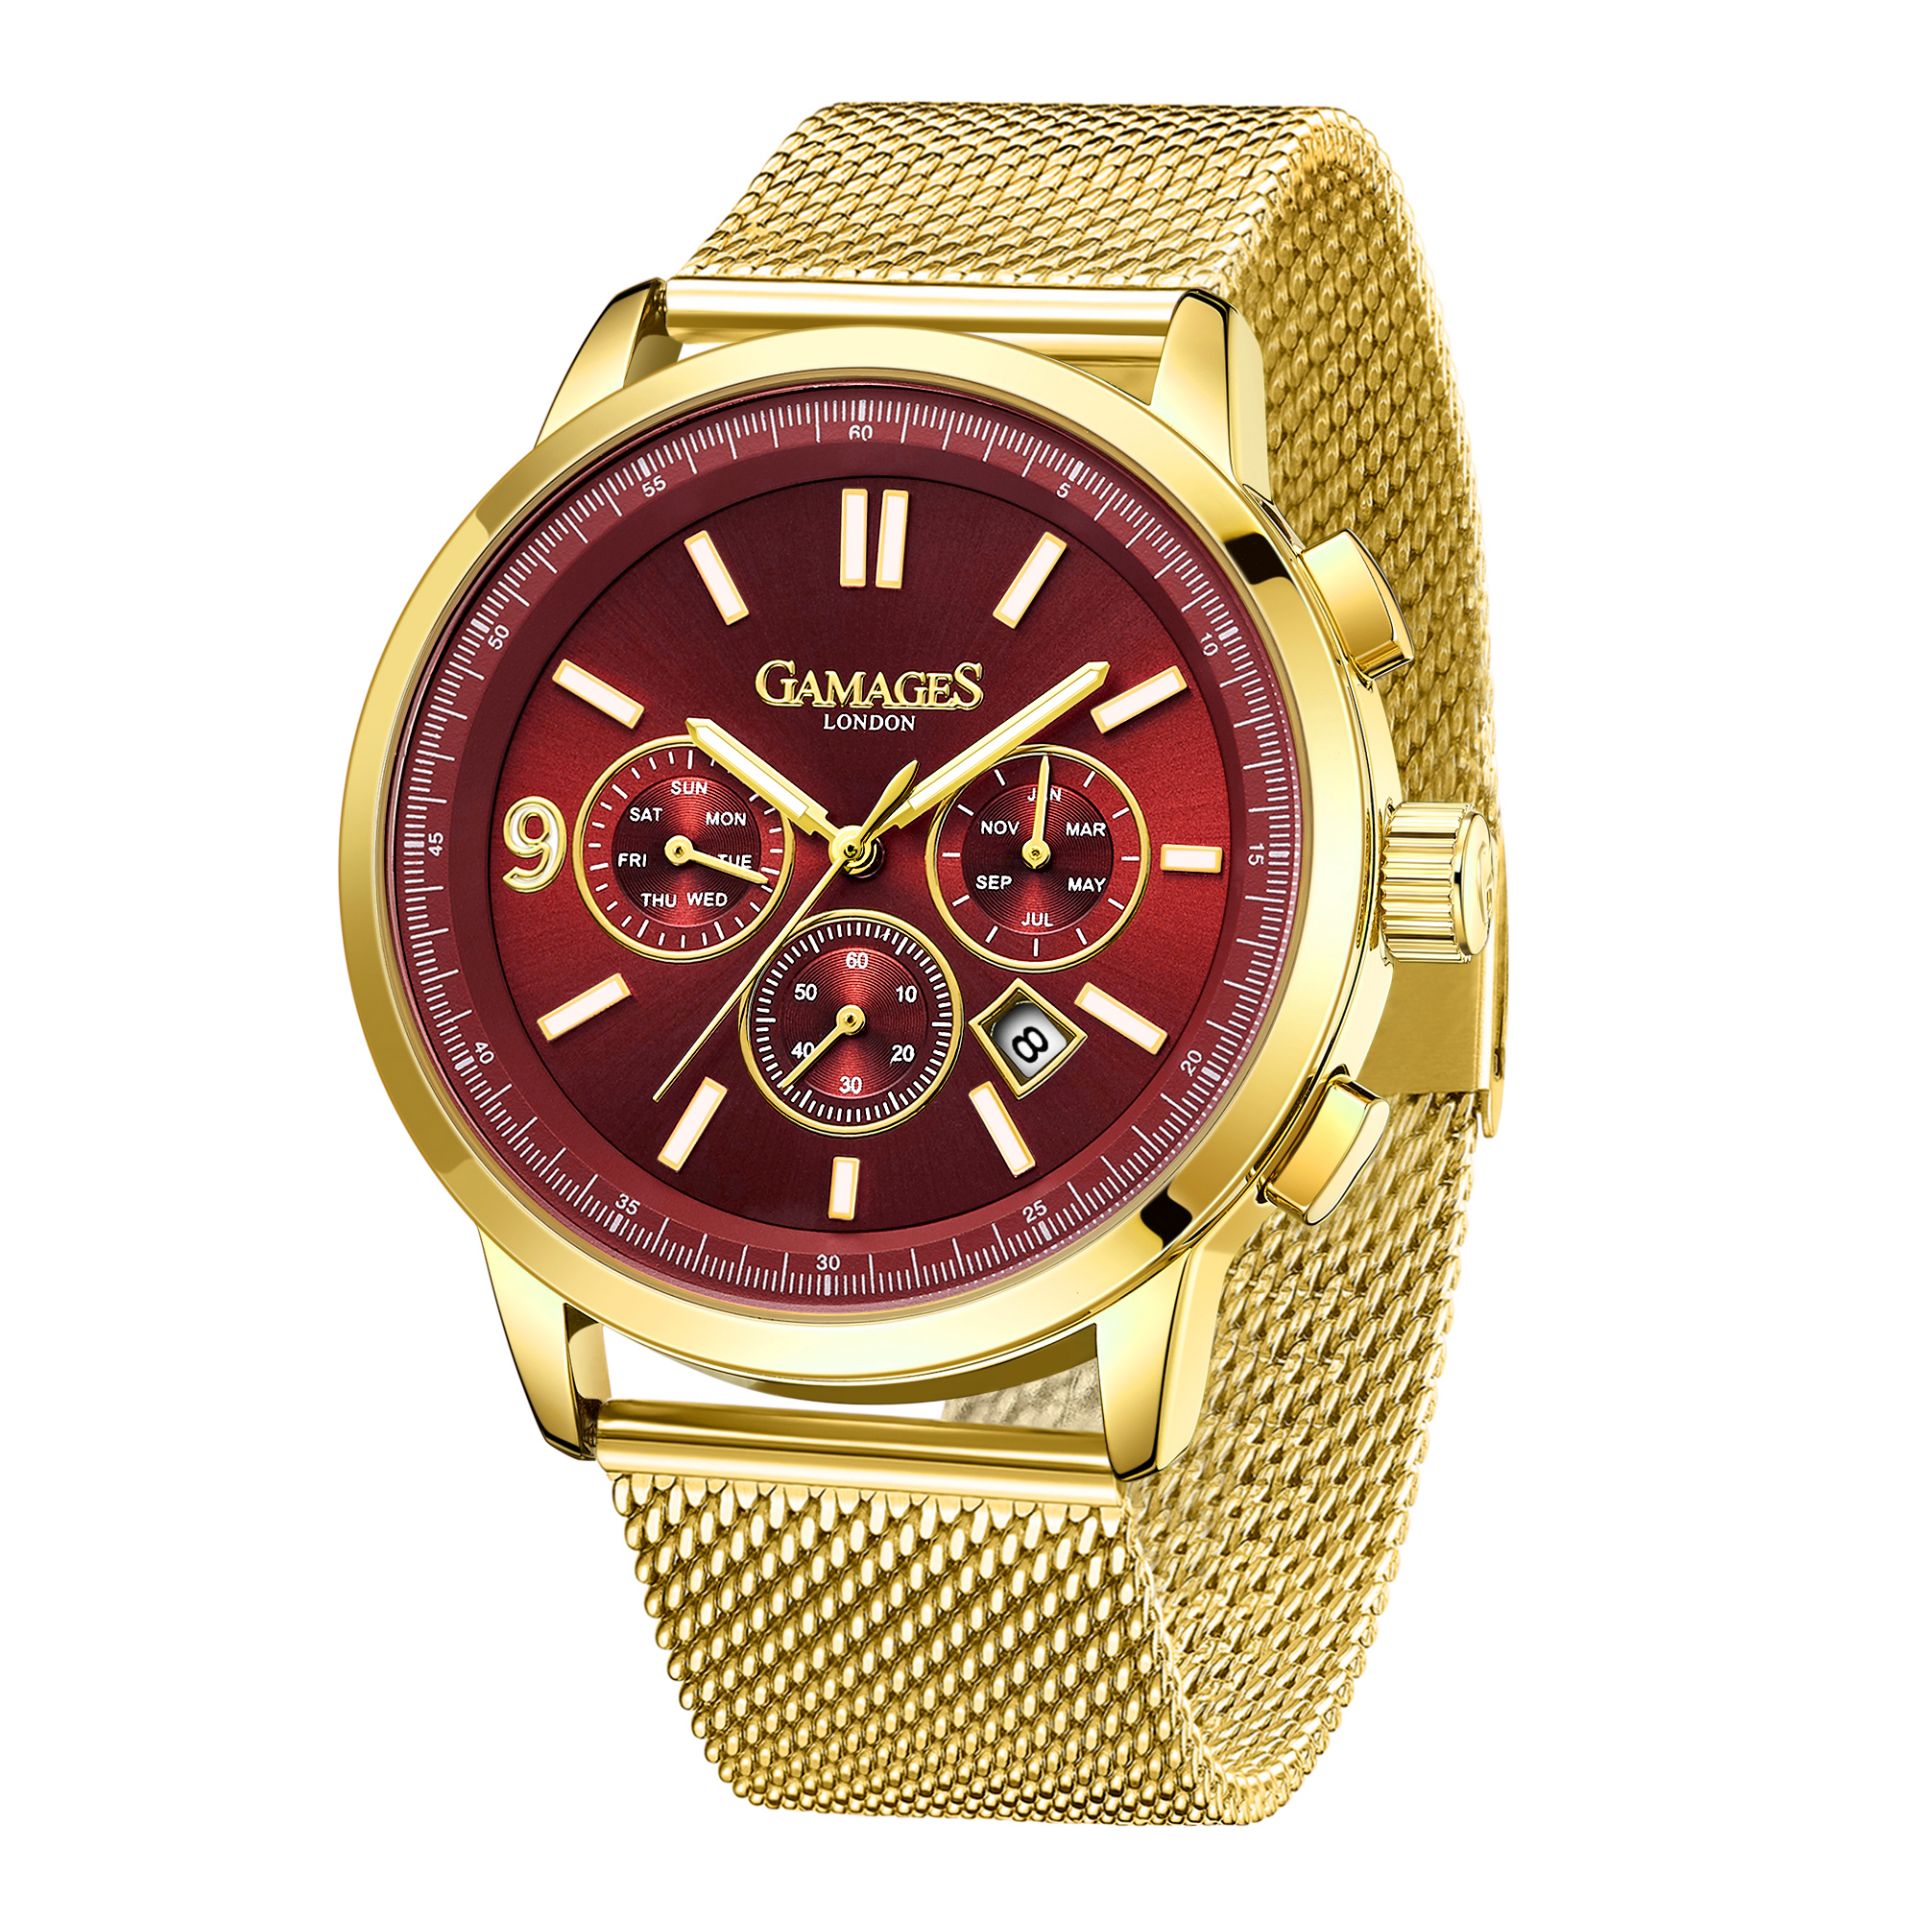 Ltd Edition Hand Assembled Gamages Omniscient Automatic Red Gold - 5 Year Warranty & Free Delivery - Image 3 of 5